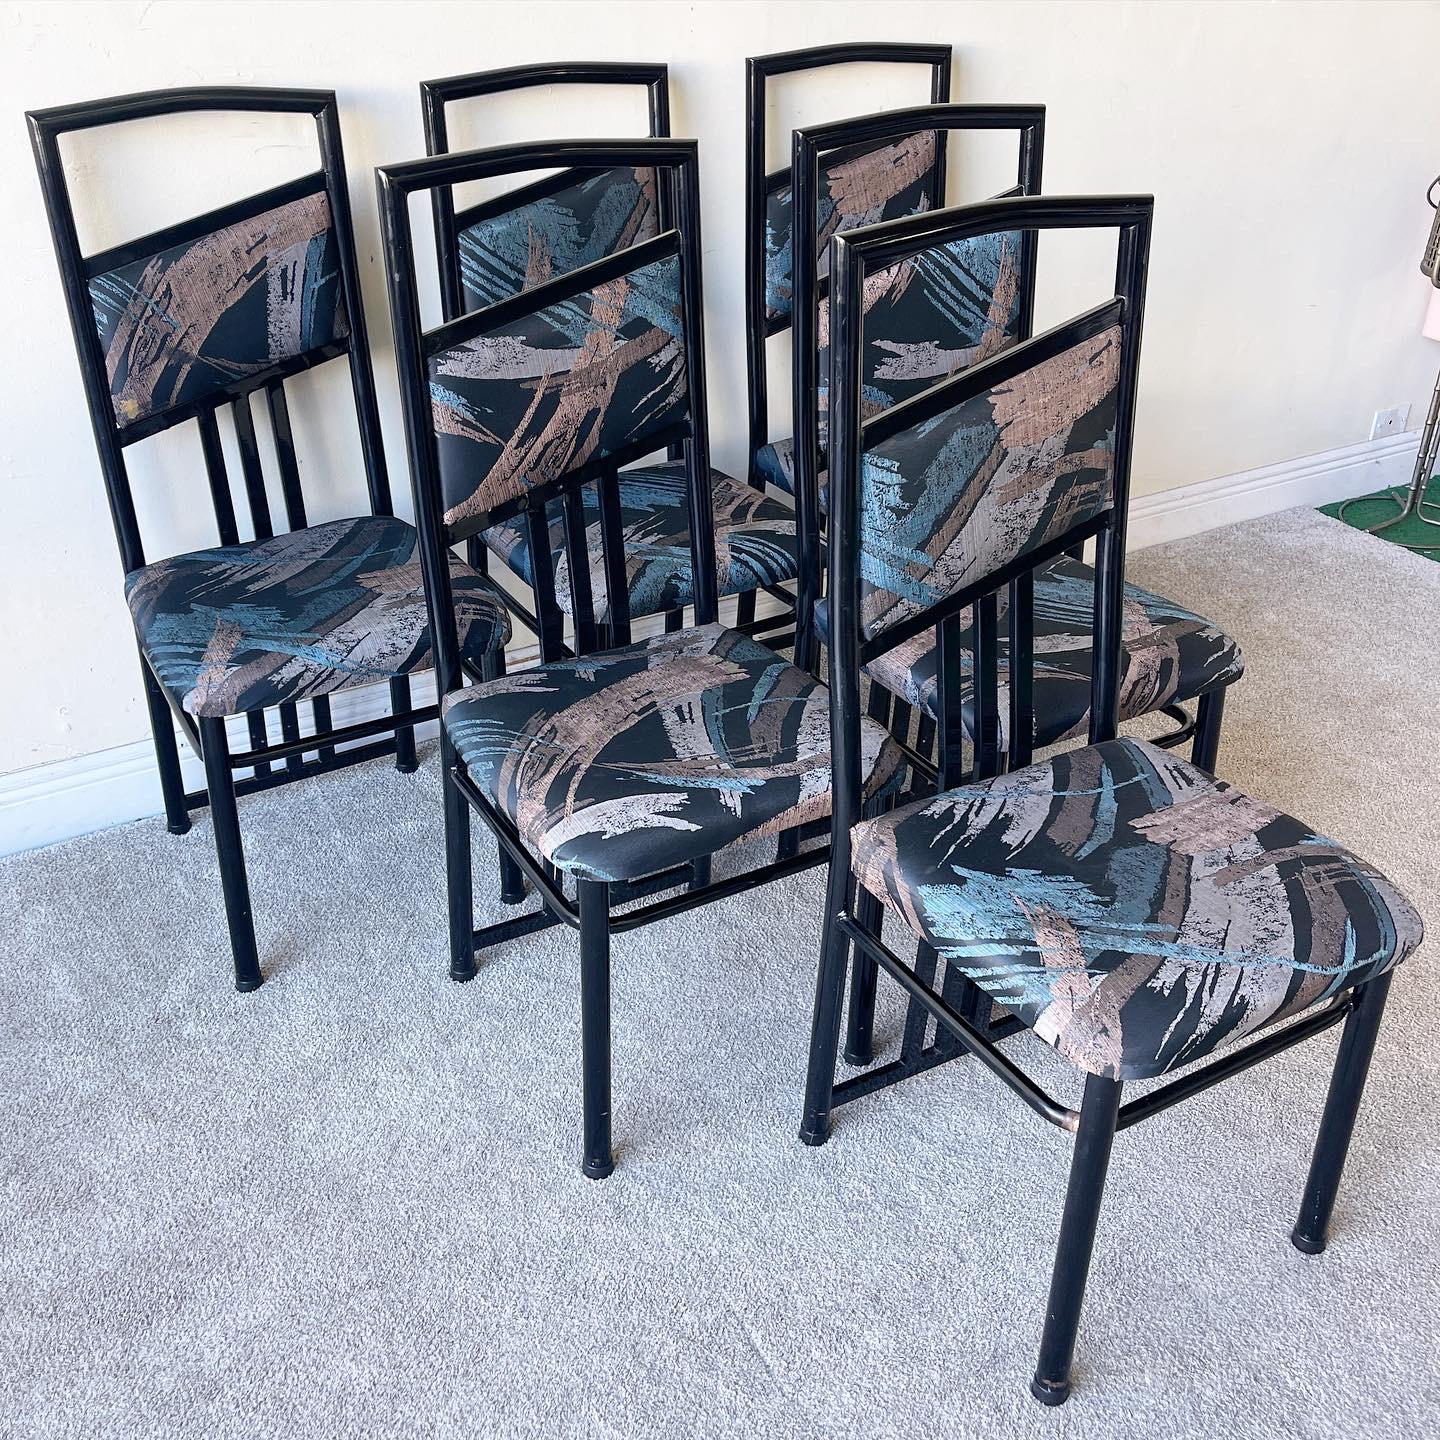 Amazing set of 6 metal chairs. Each feature a Art Deco revival shape and fabric. The chairs are a metal painted with a black lacquer.

Additional information:
Material: Fabric, Metal
Color: Black, Green, Purple
Style: Art Deco, Postmodern
Time